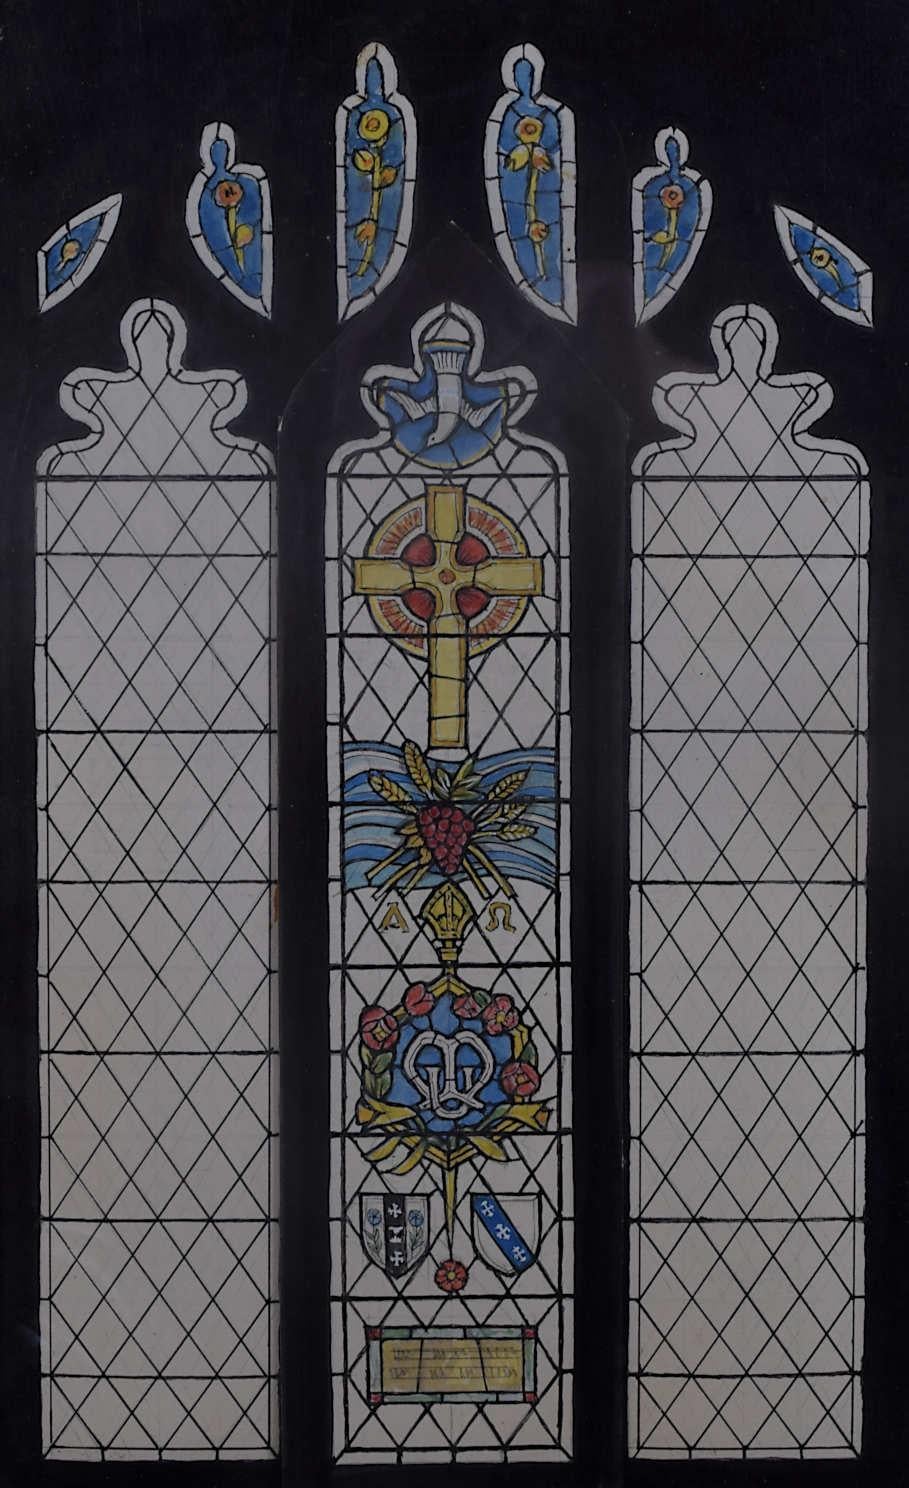 We acquired a series of watercolour stained glass designs from Jane Gray's studio. To find more scroll down to "More from this Seller" and below it click on "See all from this seller." 

Jane Gray (b.1931)
Stained Glass Design
Watercolour
25.5 x